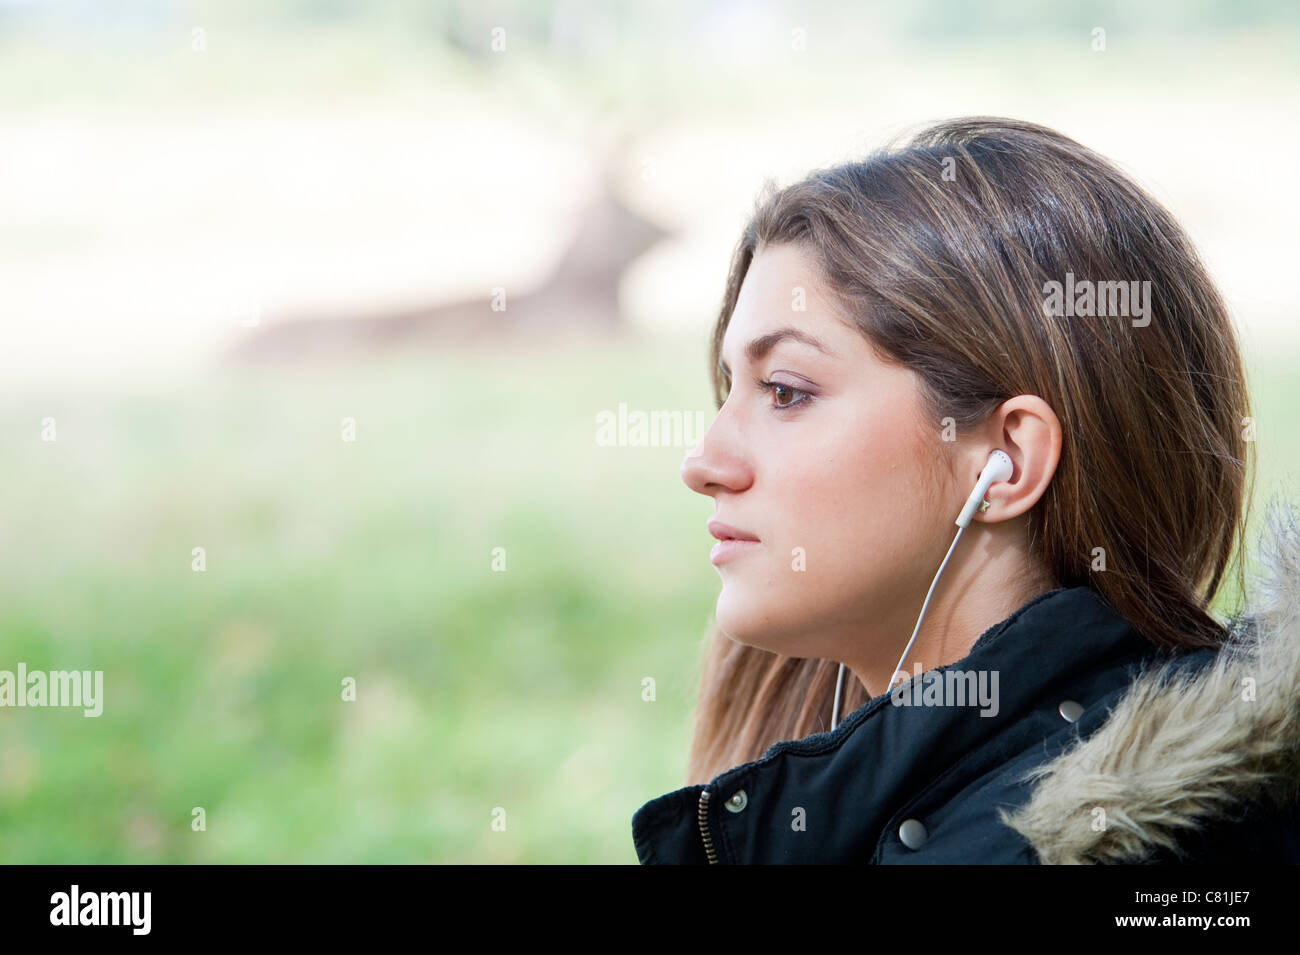 15 Year old girl listening to music on a music player with headphones in the park. Stock Photo